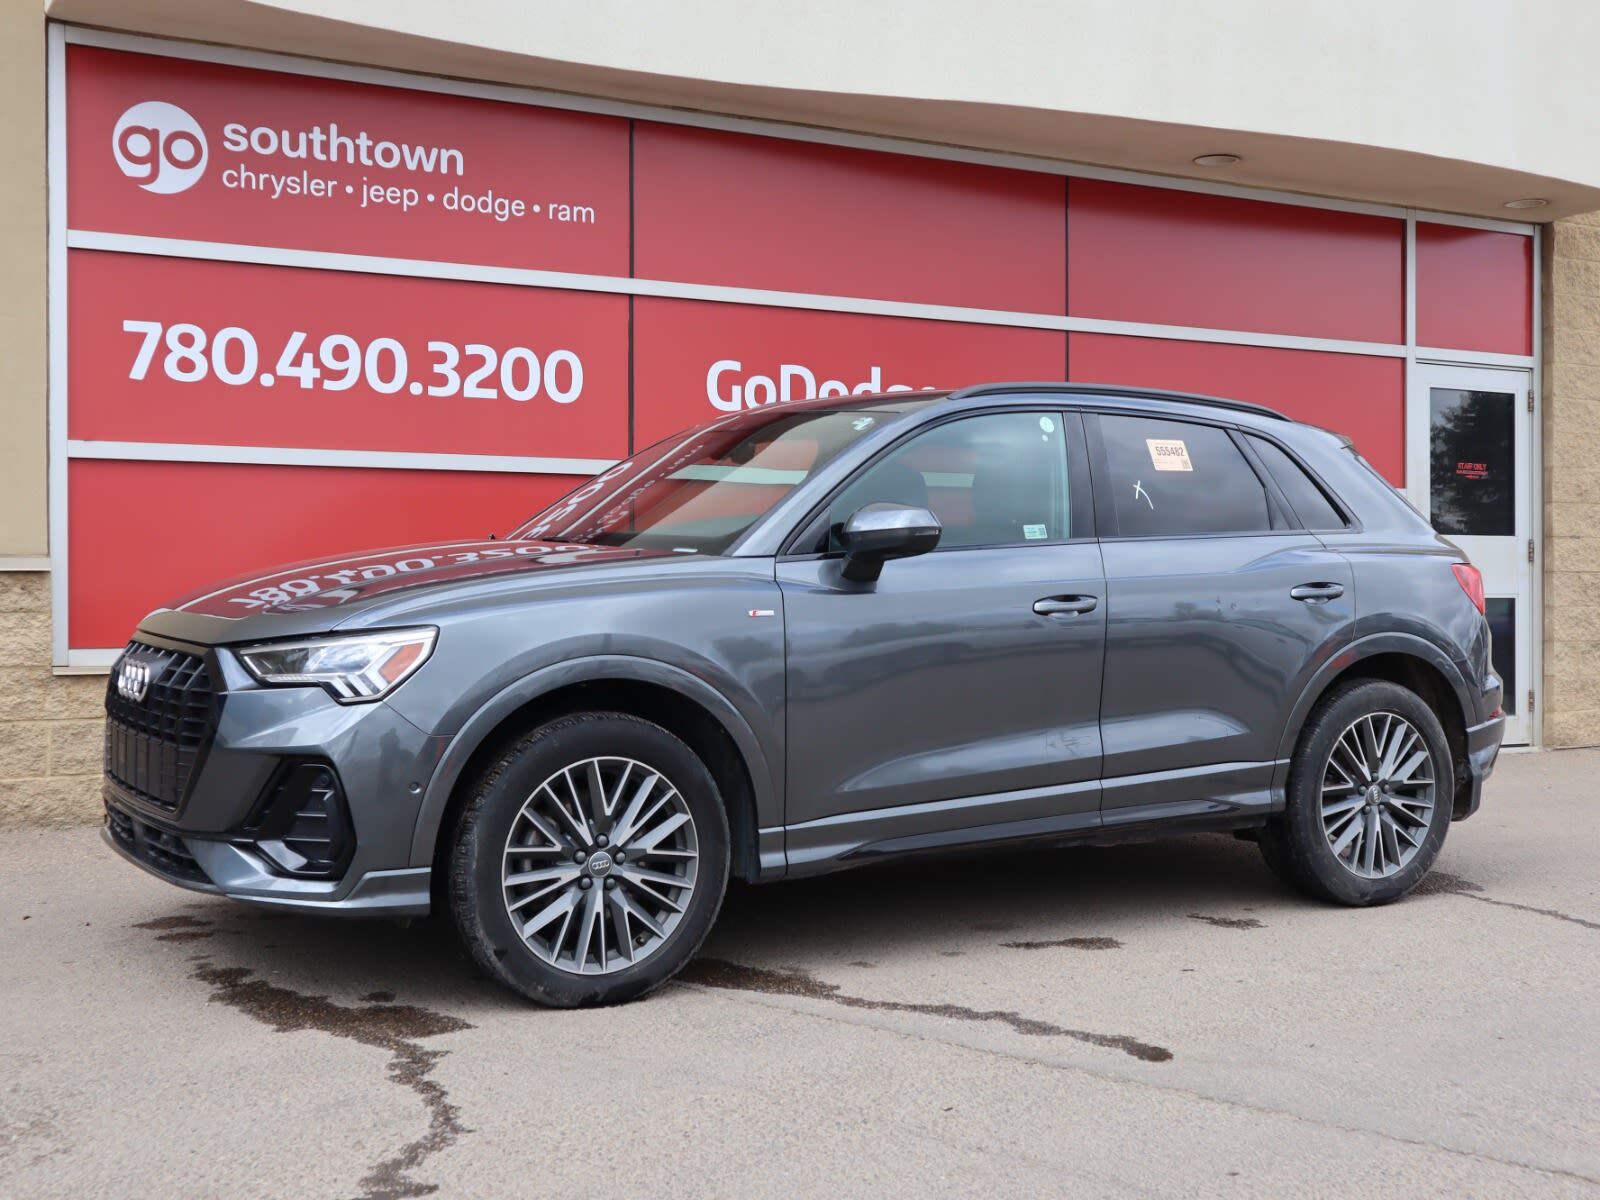 2020 Audi Q3 TECHNIK IN GREY EQUIPPED WITH A 228HP 2.0L TURBO I